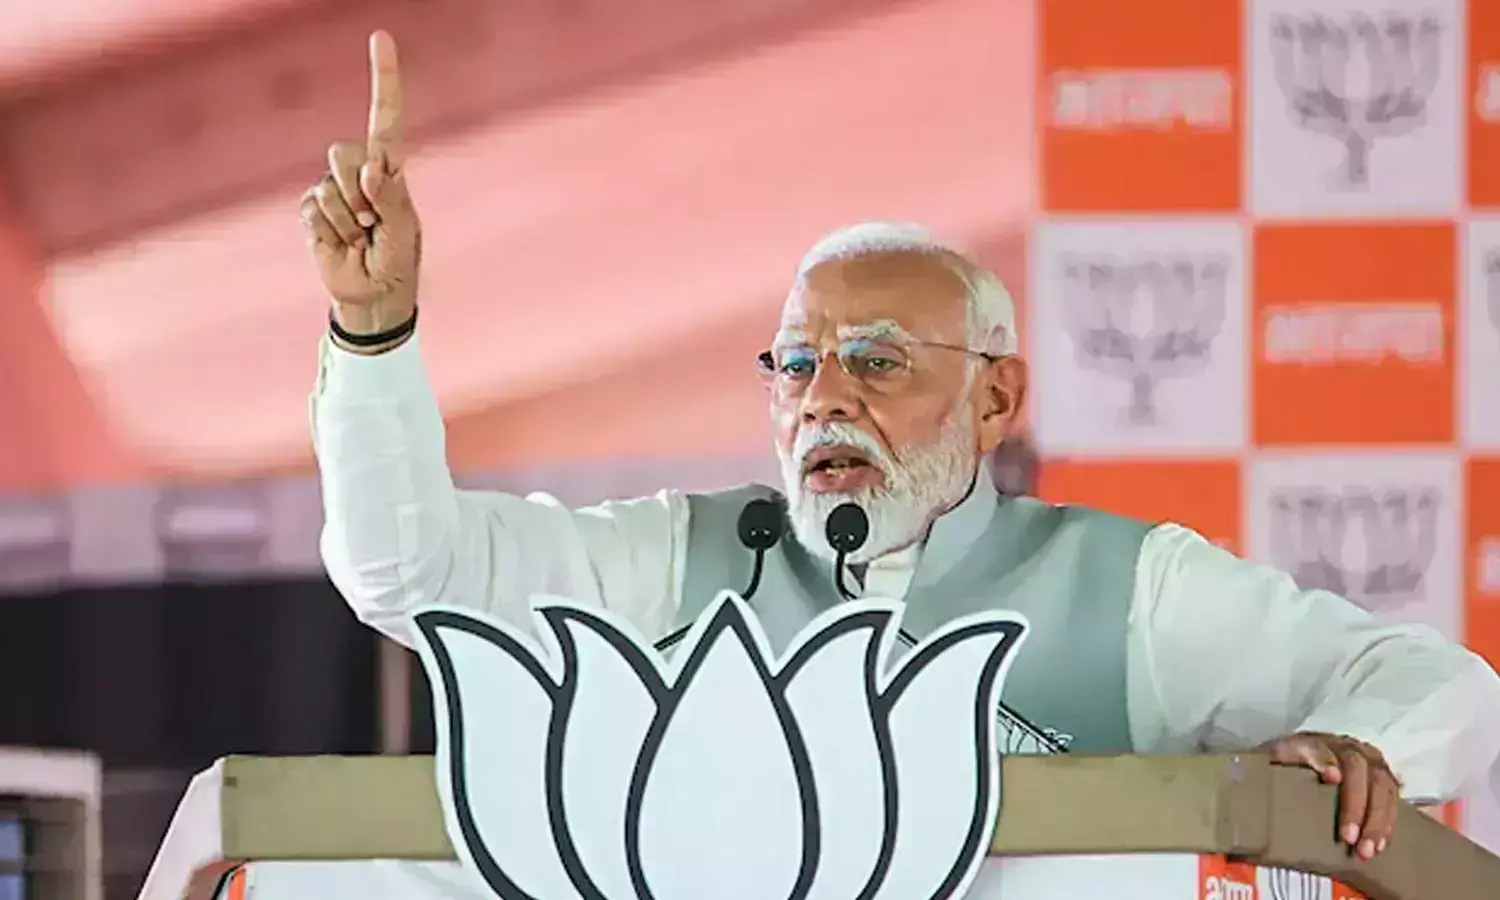 PM Modi urges people to not get upset with insulting language used against him by Congress